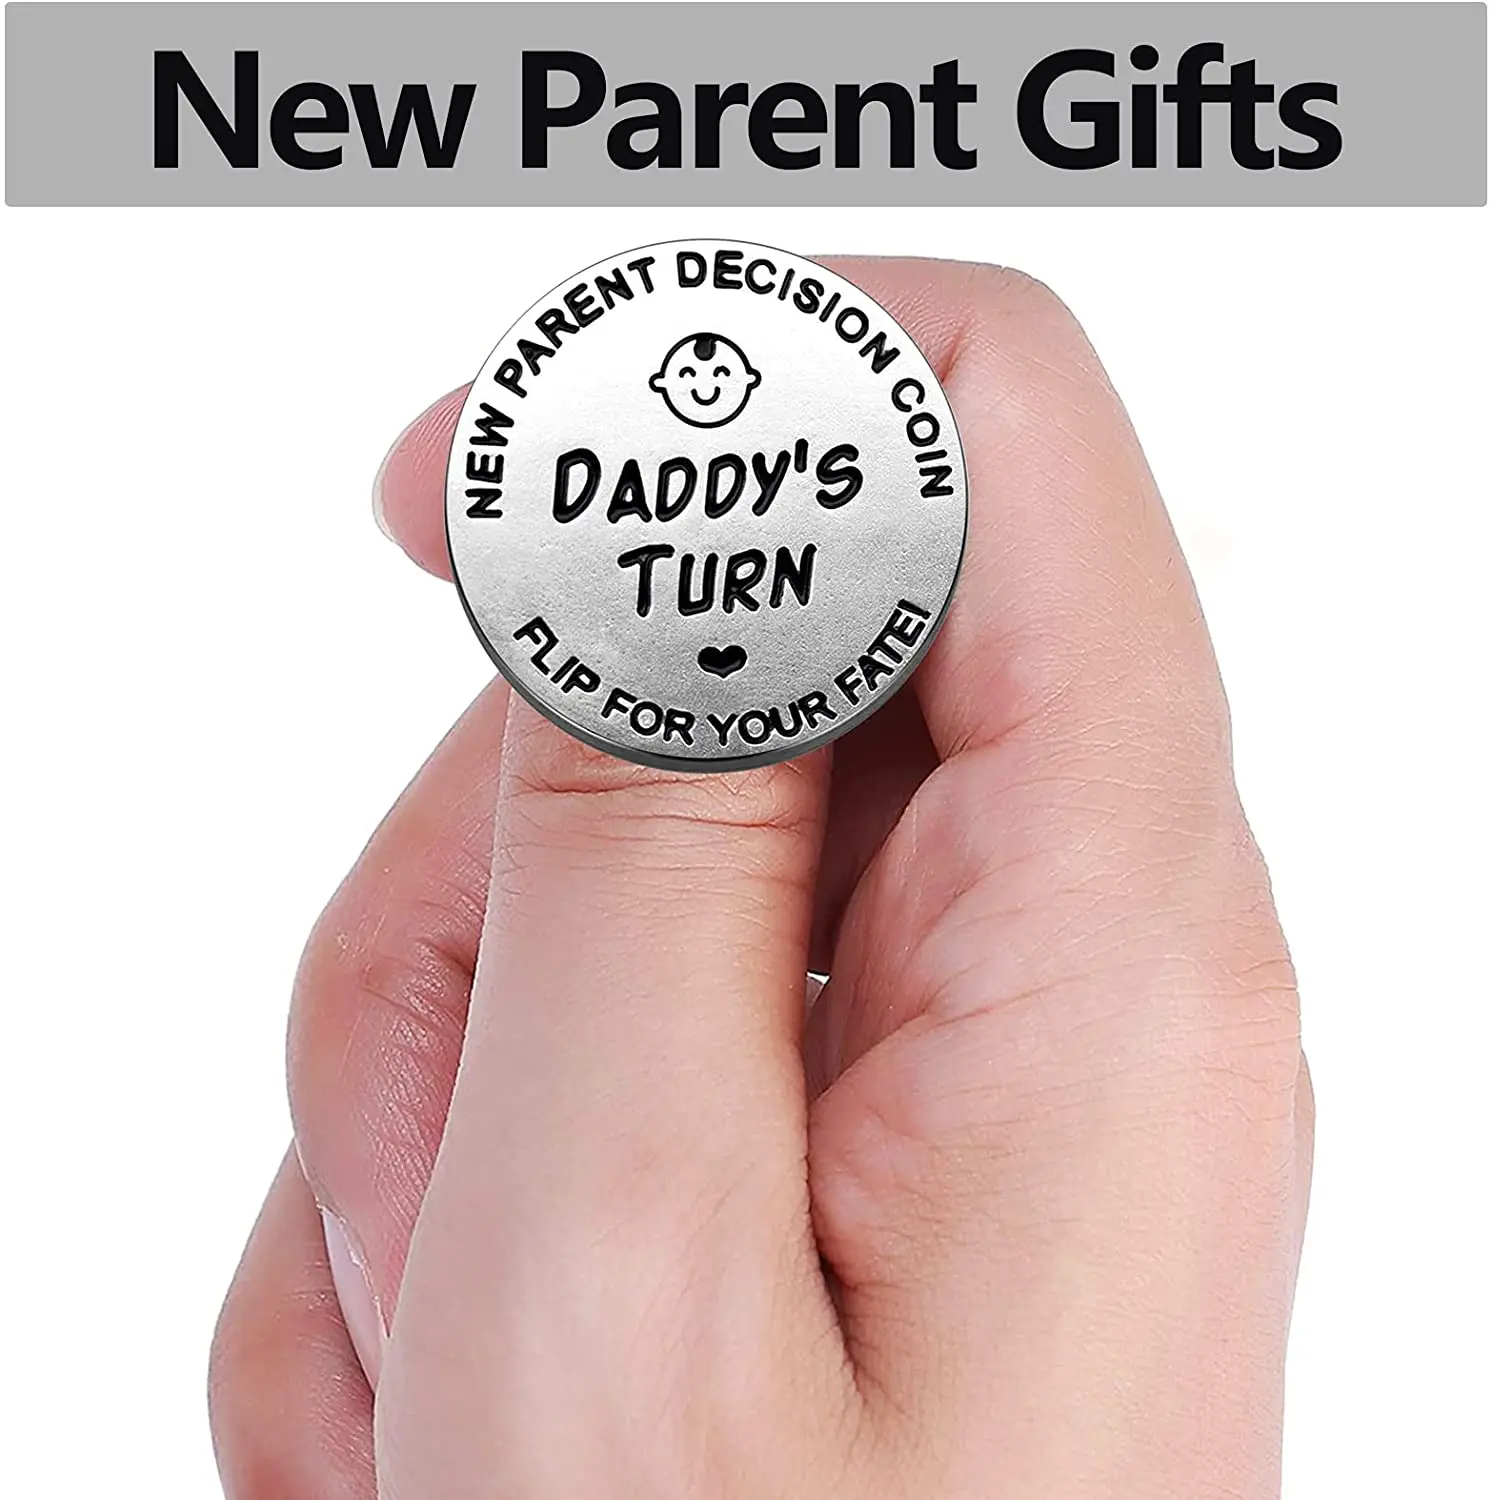 First Pregnancy mom and dad Make Christmas Birthday Gifts. dad Decide Coins for Women Vbeca New Parents Decide Coins Men New Baby Gifts for mom 